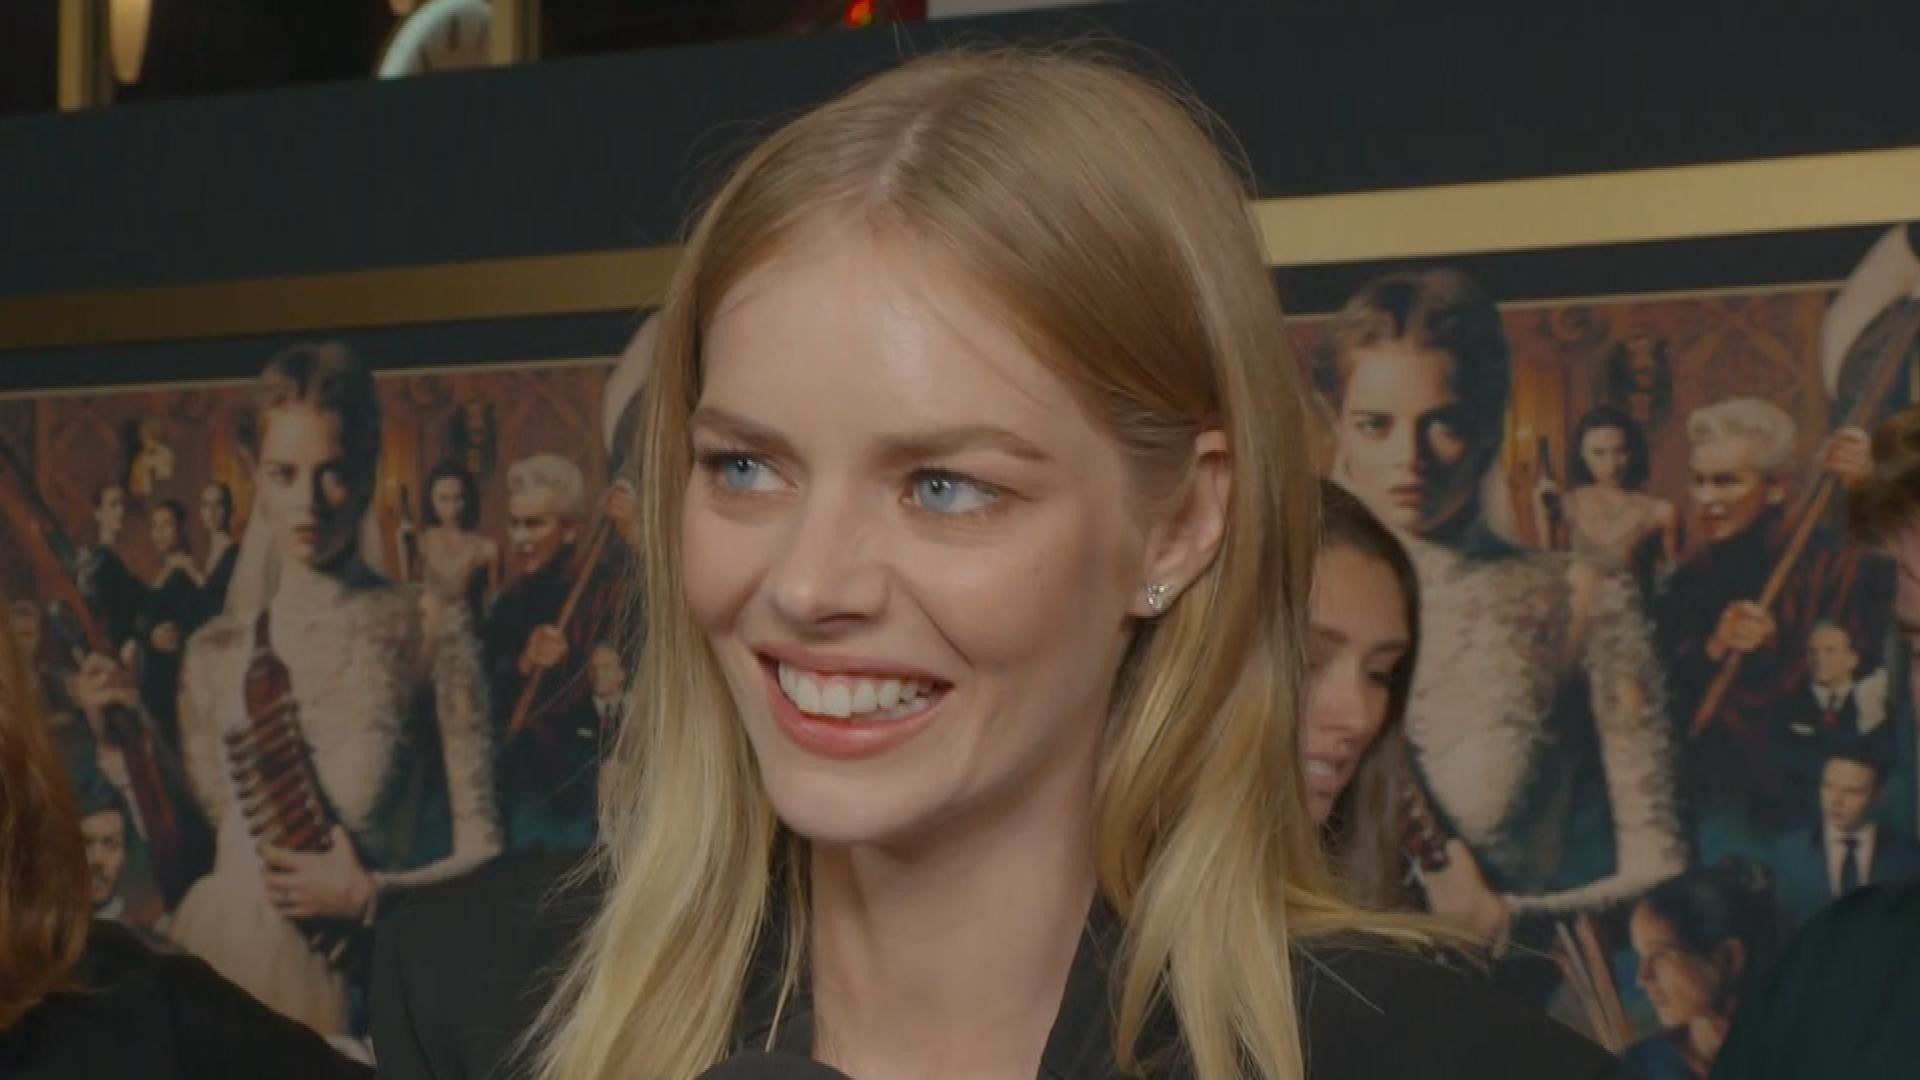 Samara Weaving Dishes on Filming 'Bill & Ted 3' With 'Gentleman' Keanu Reeves (Exclusive)